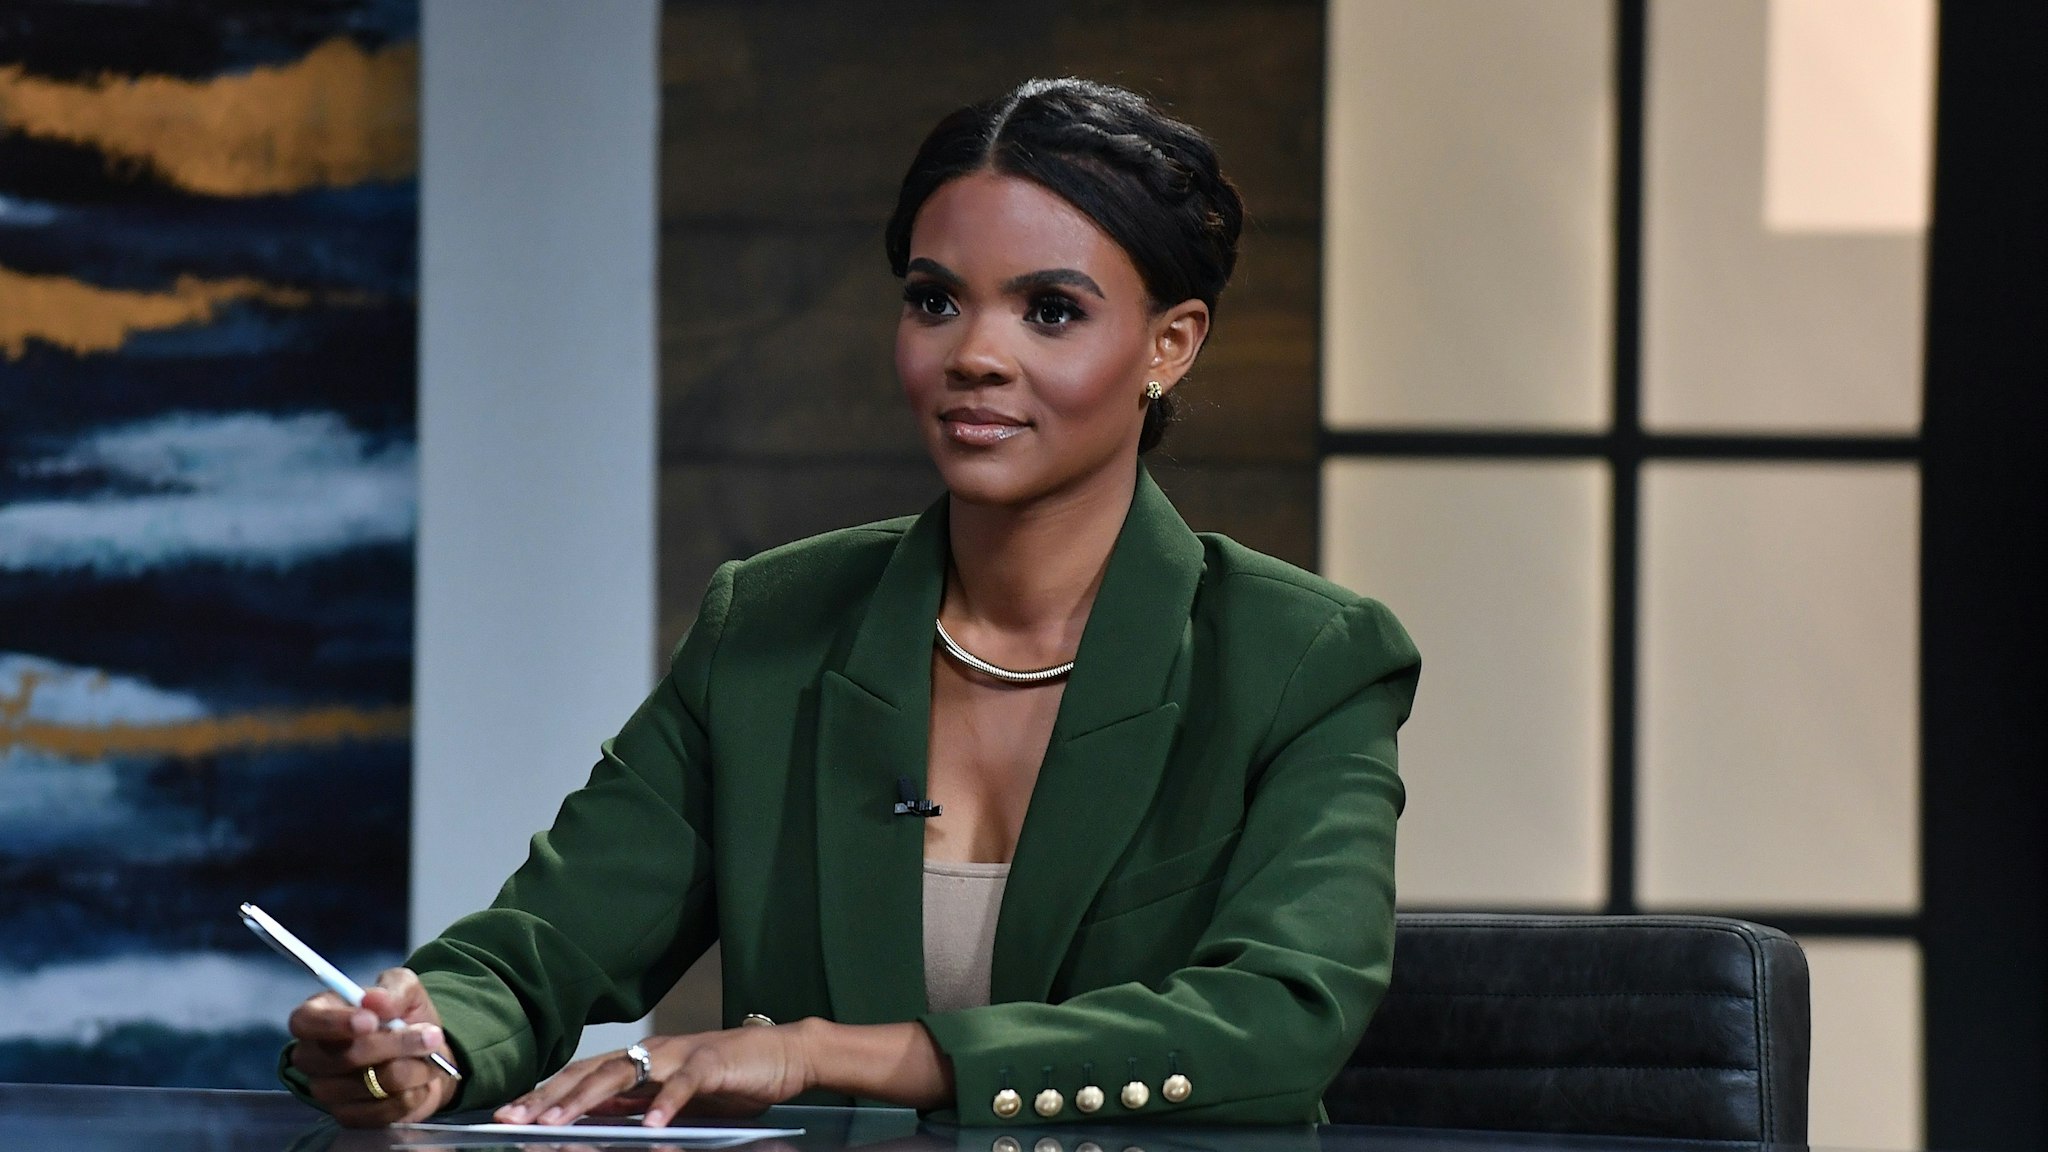 Host Candace Owens is seen on set of "Candace" on May 10, 2021 in Nashville, Tennessee. The show will air on Tuesday, May 11, 2021. (Photo by Jason Davis/Getty Images)